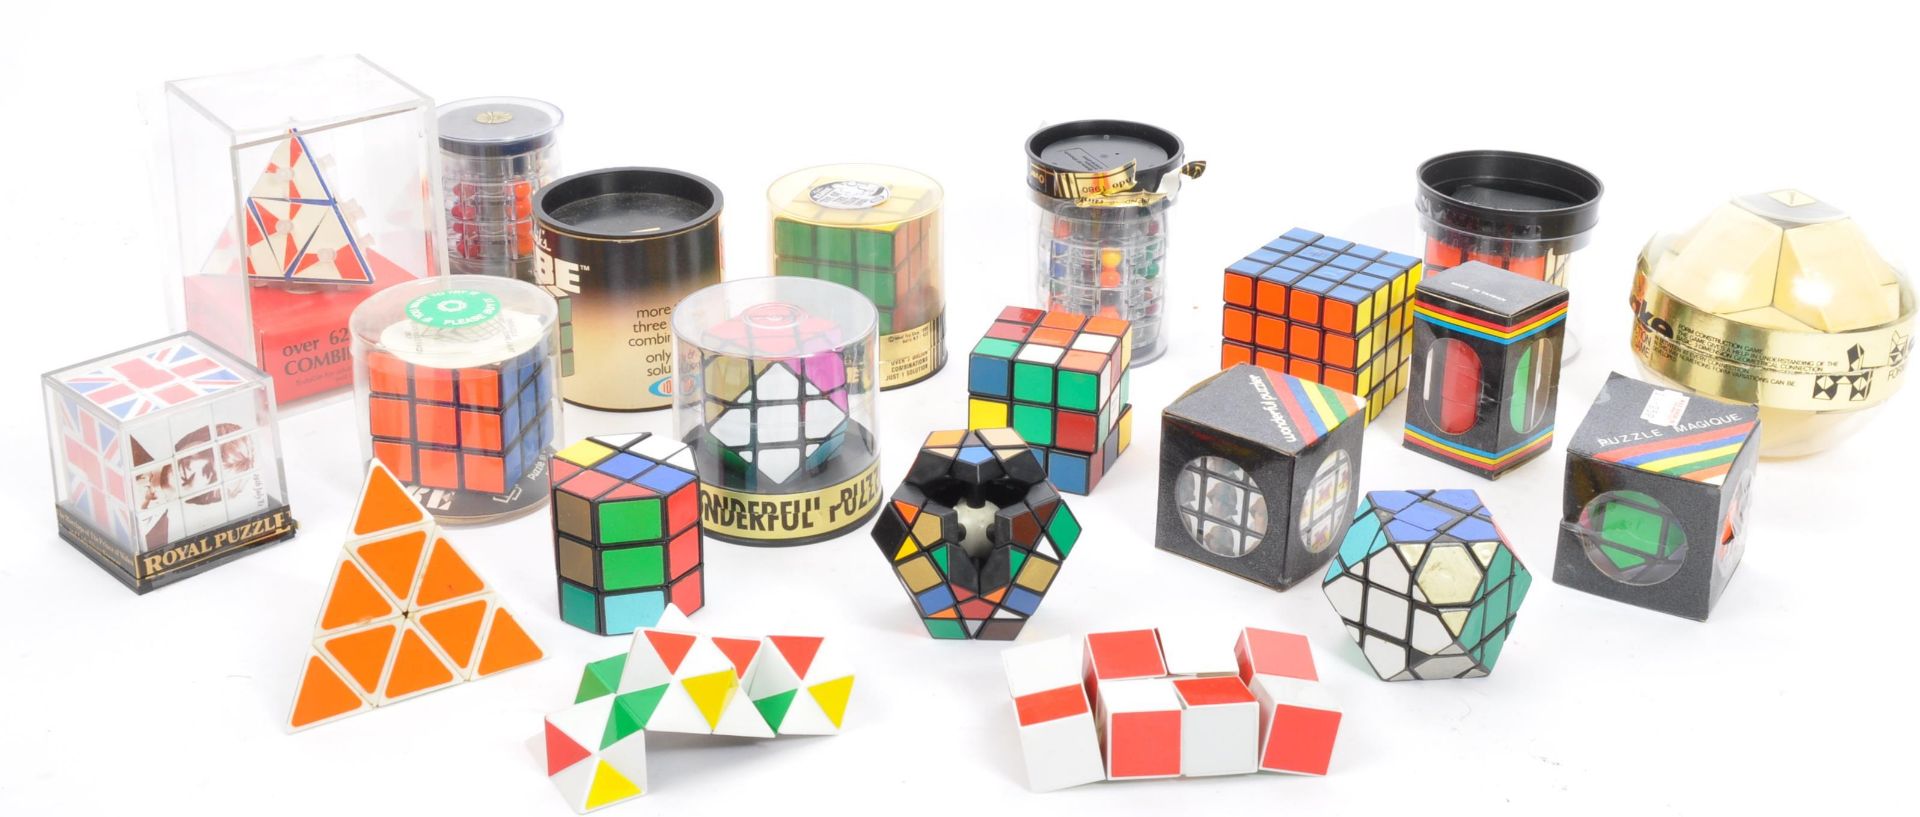 COLLECTION OF LATE 20TH CENTURY RUBIK'S CUBE & OTHER PUZZLES